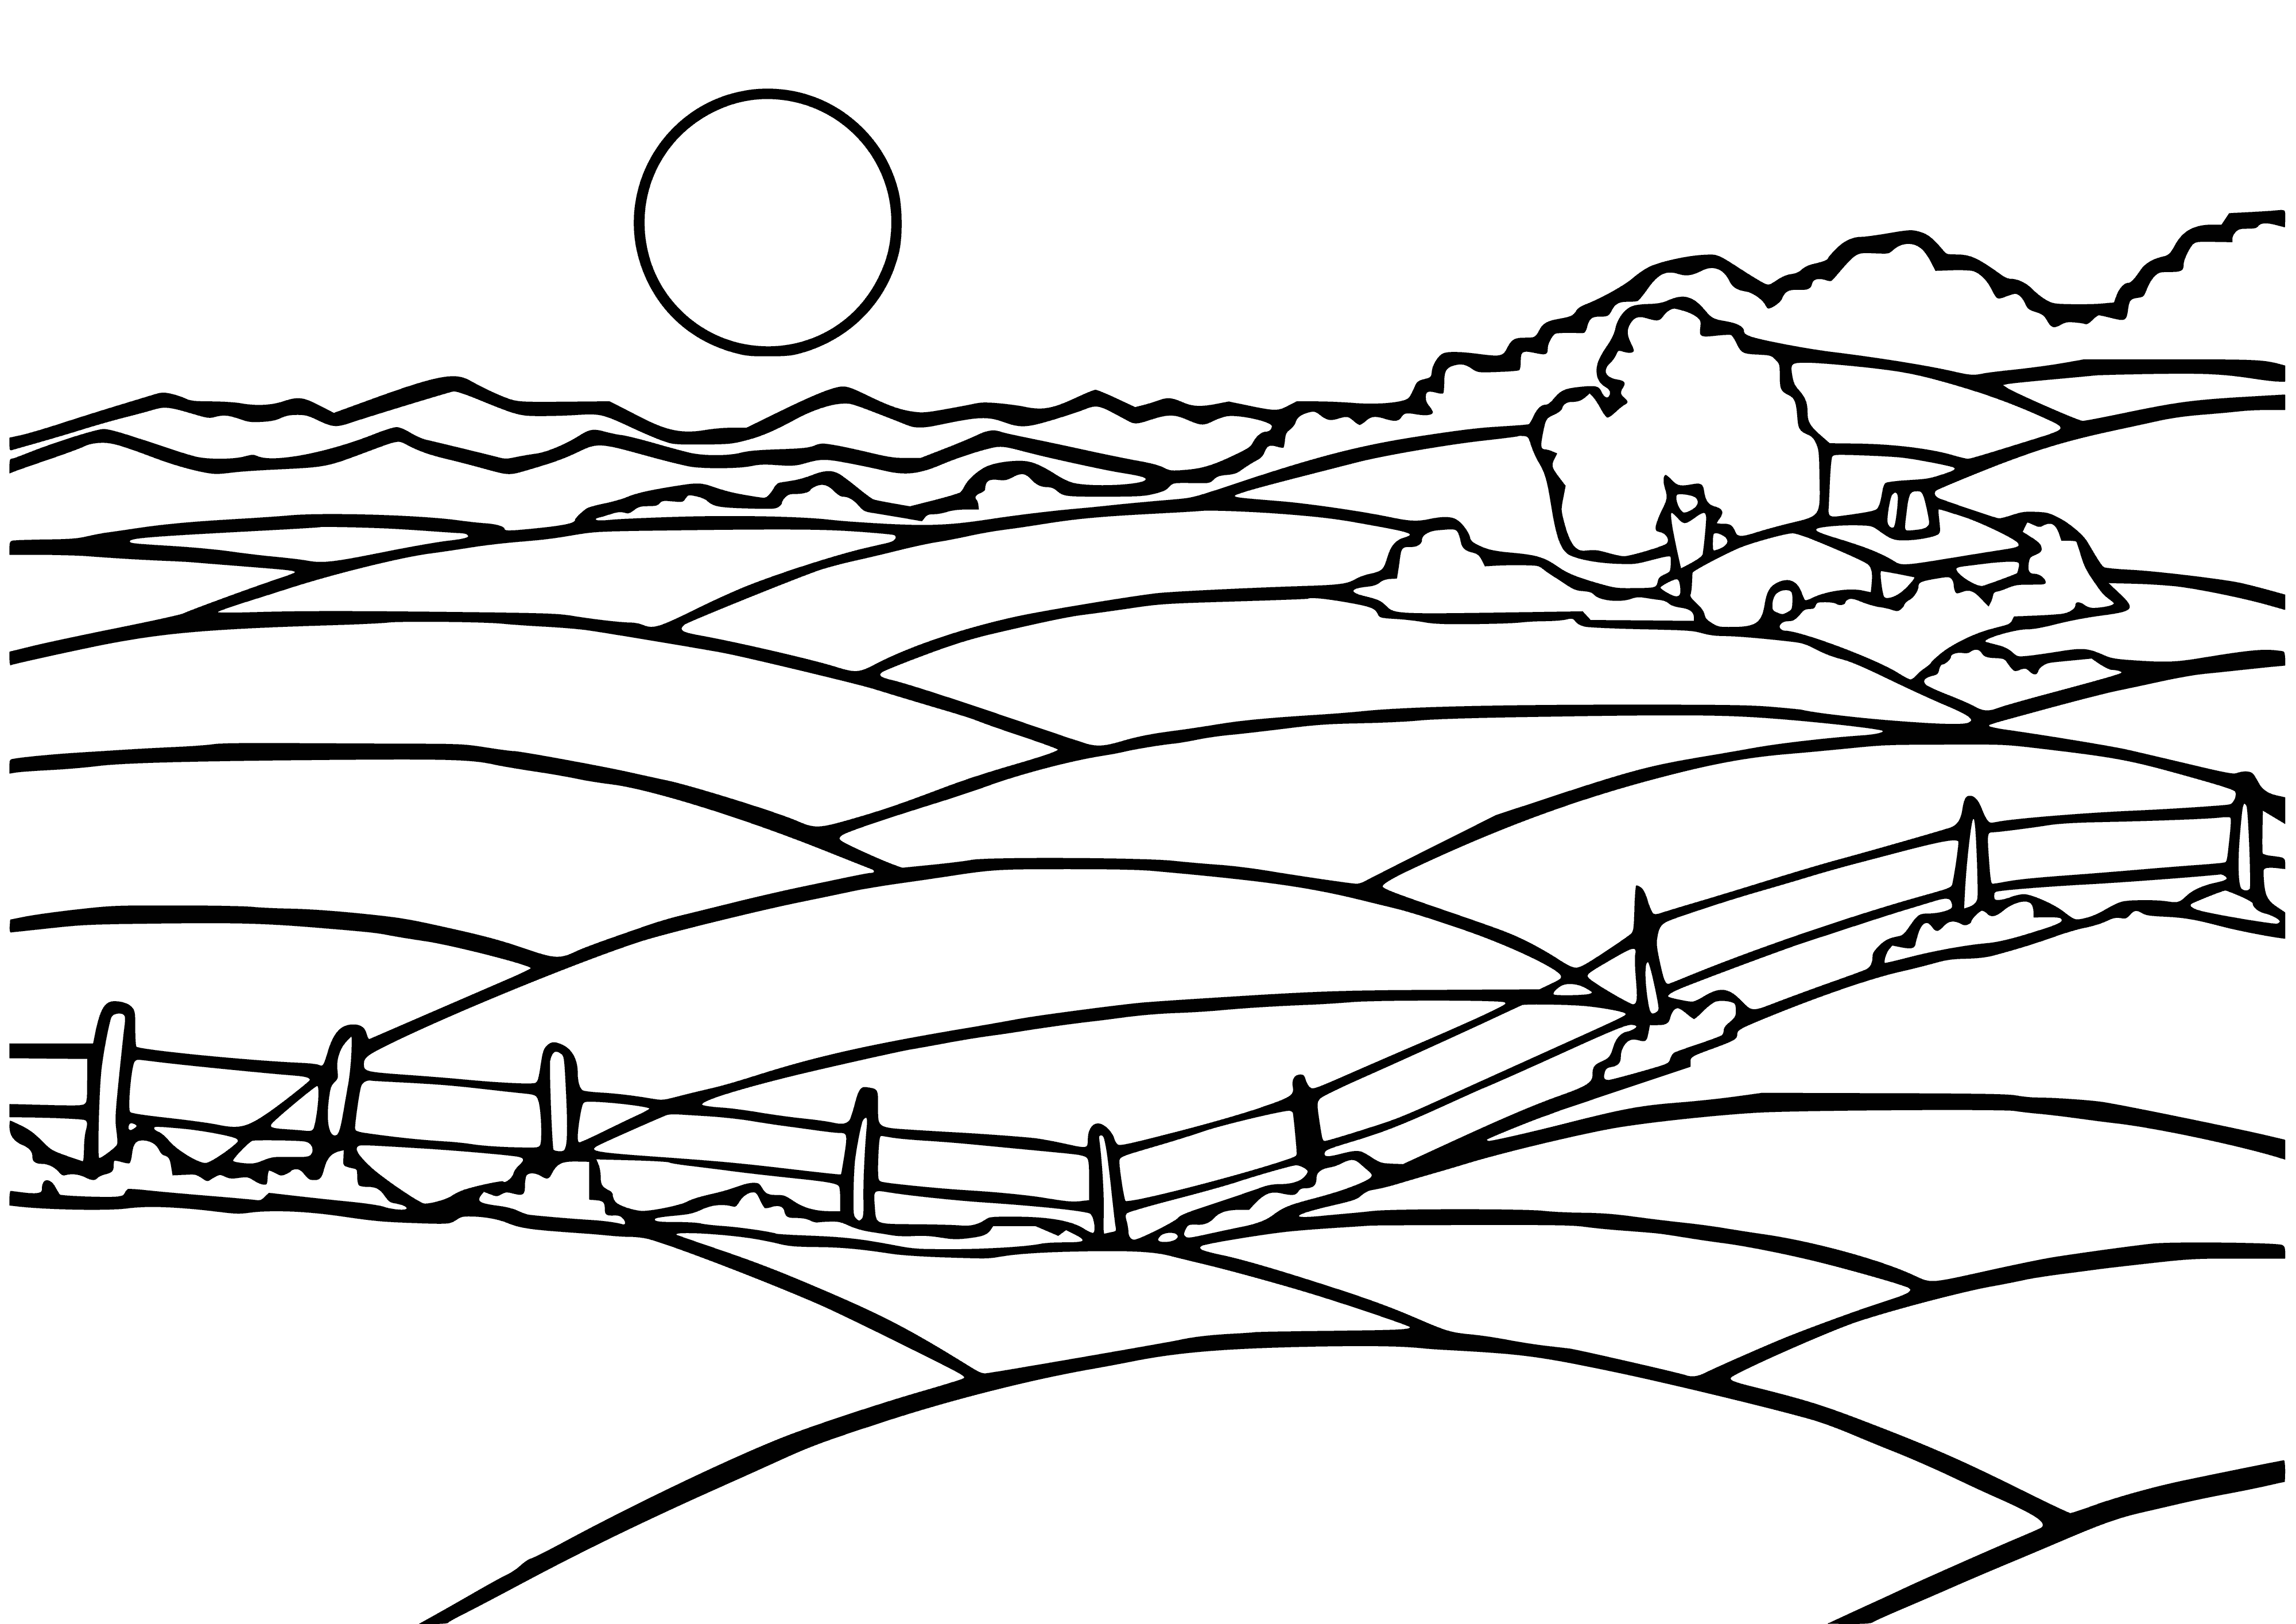 Fields coloring page